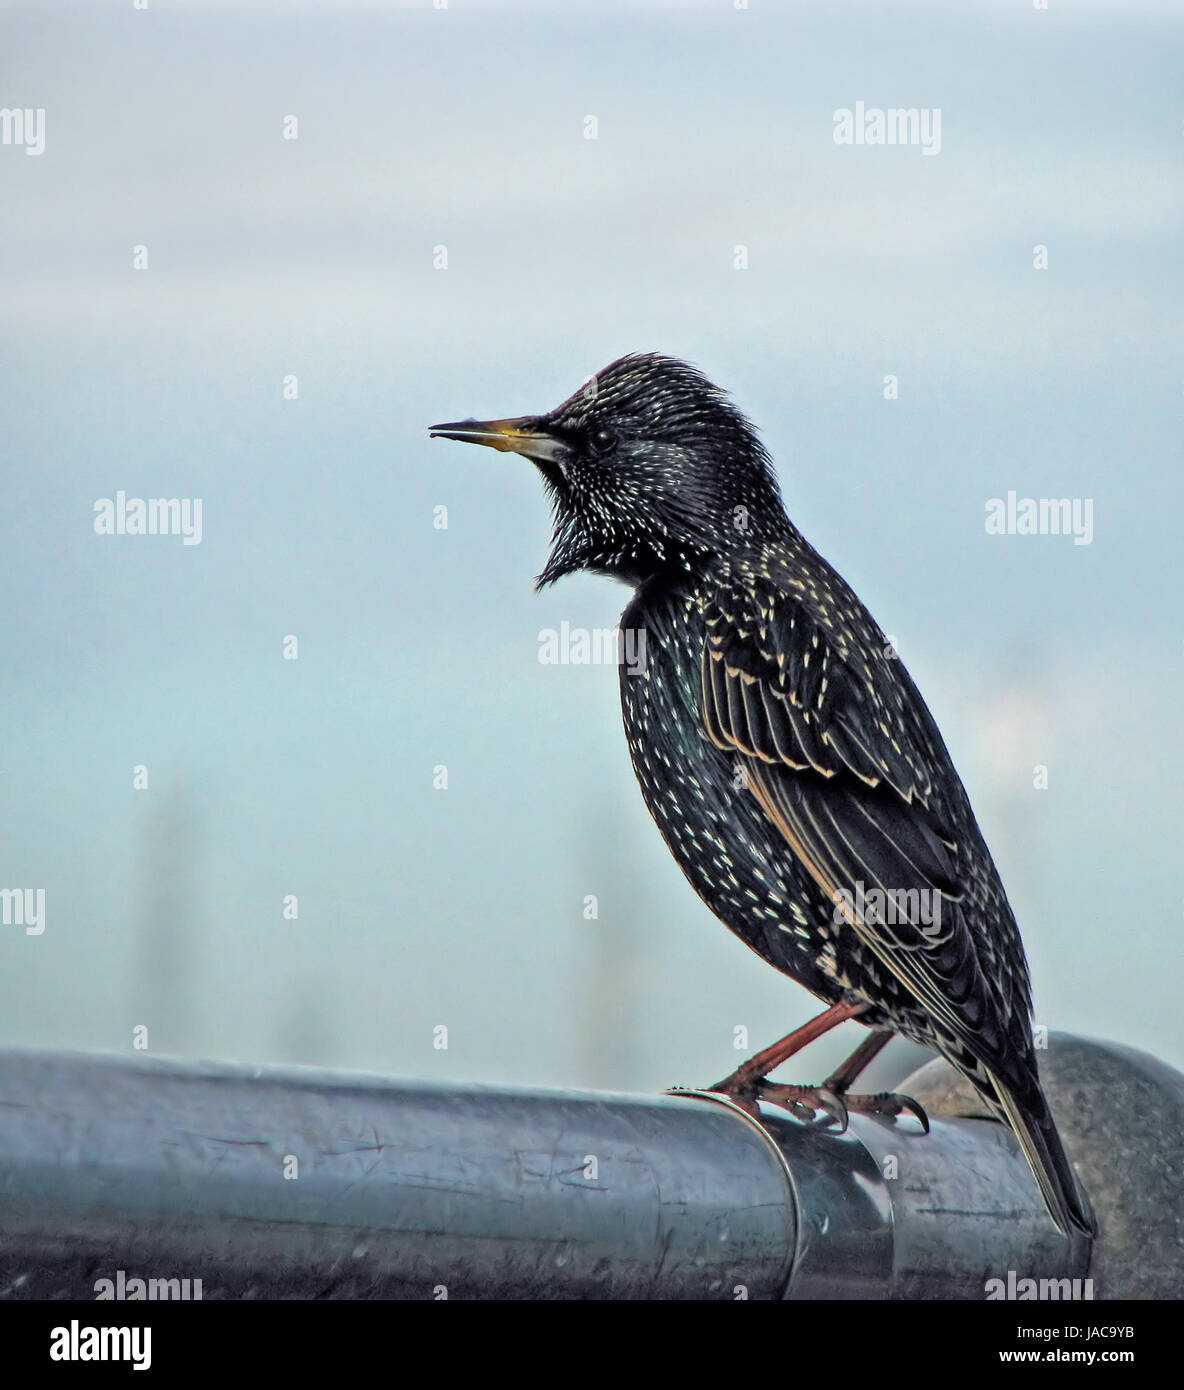 Common or European Starling shows off its striking plumage. Stock Photo